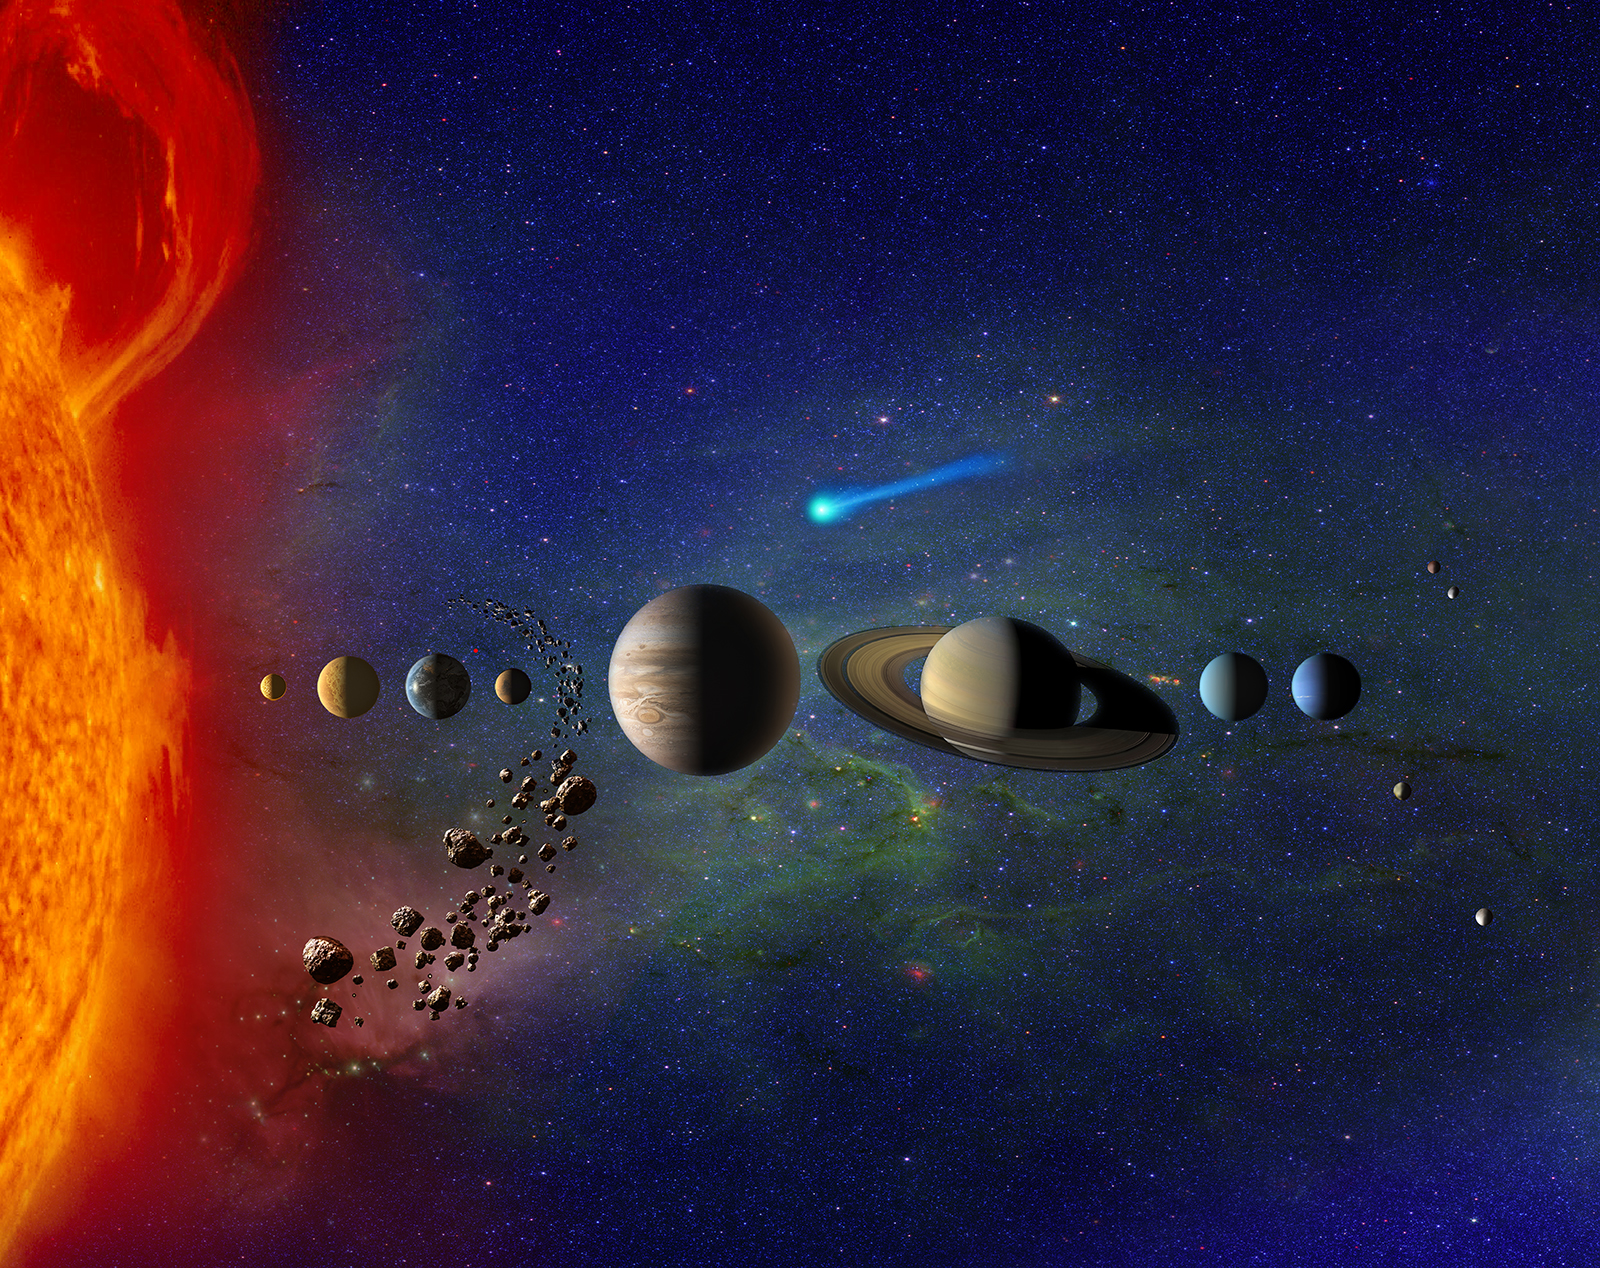 Scoring Less Than 75% On This Science Quiz Means You Should Go Back to School Solar System (artist's impression)